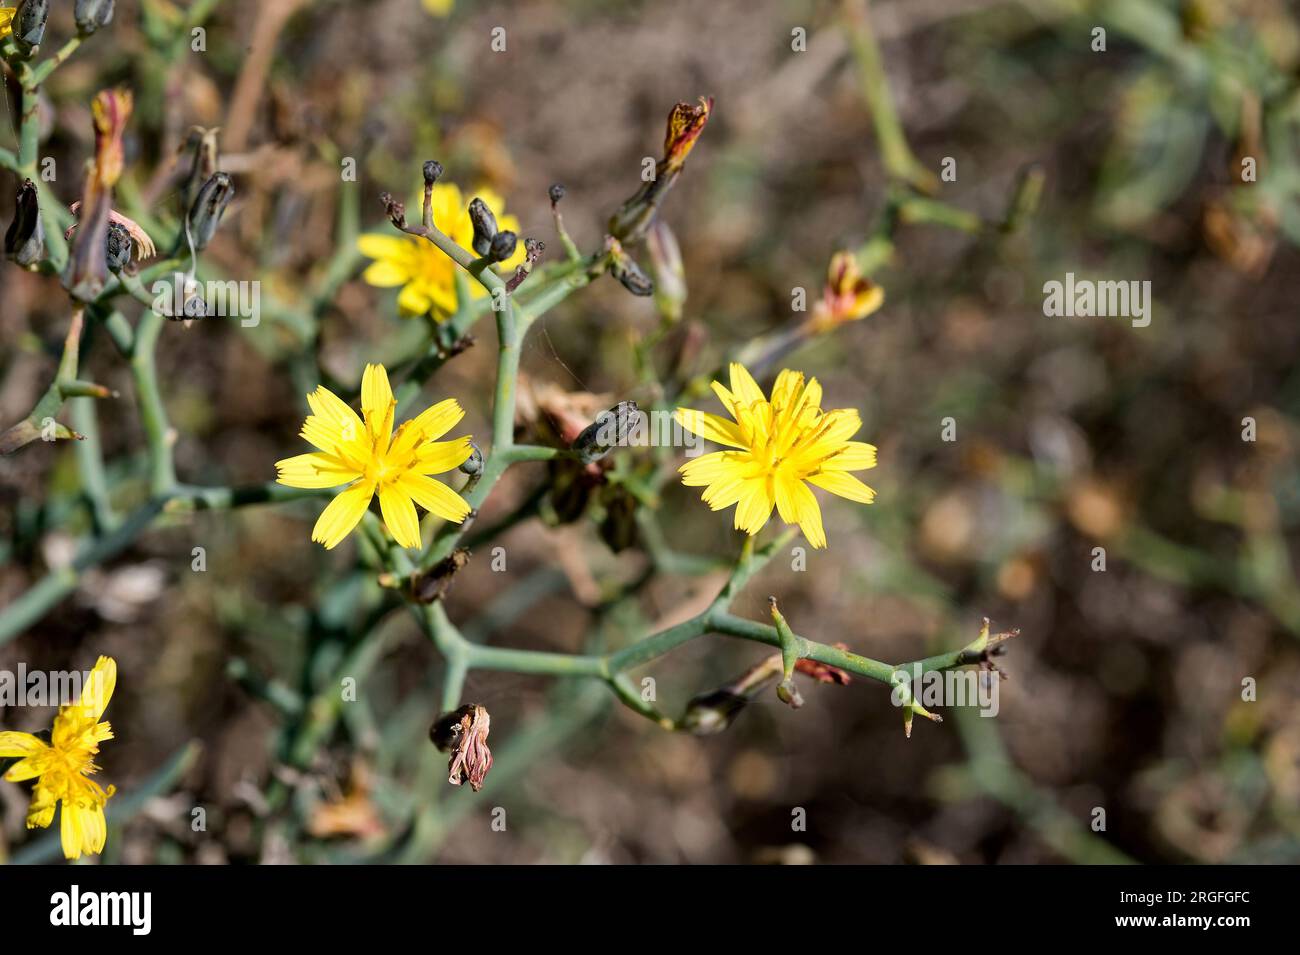 Aulaga, cardaviejo or rascaviejas (Launaea arborescens) is a dense and prickly shrub native of Canary Islands, northwest Africa and southeast  Spain. Stock Photo